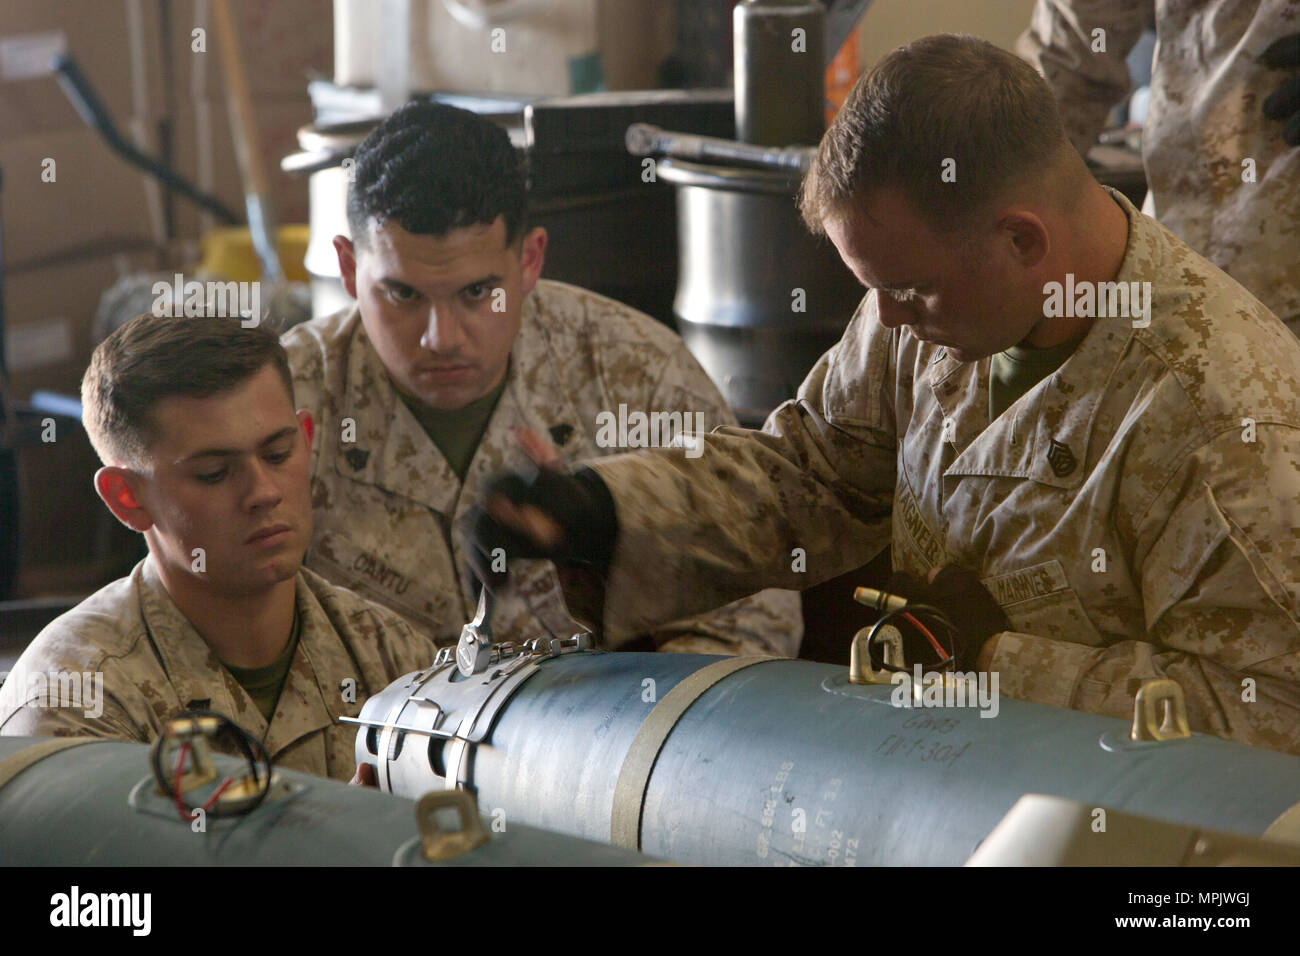 U.S. Marines with various Marine Aviation Logistics Squadrons (MALS) give a period of instruction on the Guided Bomb Unit 38 (GBU-38) during the first ever Aircraft Maintenance Officer Course (AAMOC) at Marine Corps Air Station Yuma, Ariz., March 17, 2017. AAMOC will empower Aircraft Maintenance Officers with leadership tools, greater technical knowledge, and standardized practices through rigorous academics and hands on training in order to decrease ground related mishaps and increase sortie generation. (U.S. Marine Corps photo taken by Cpl. AaronJames B. Vinculado) Stock Photo